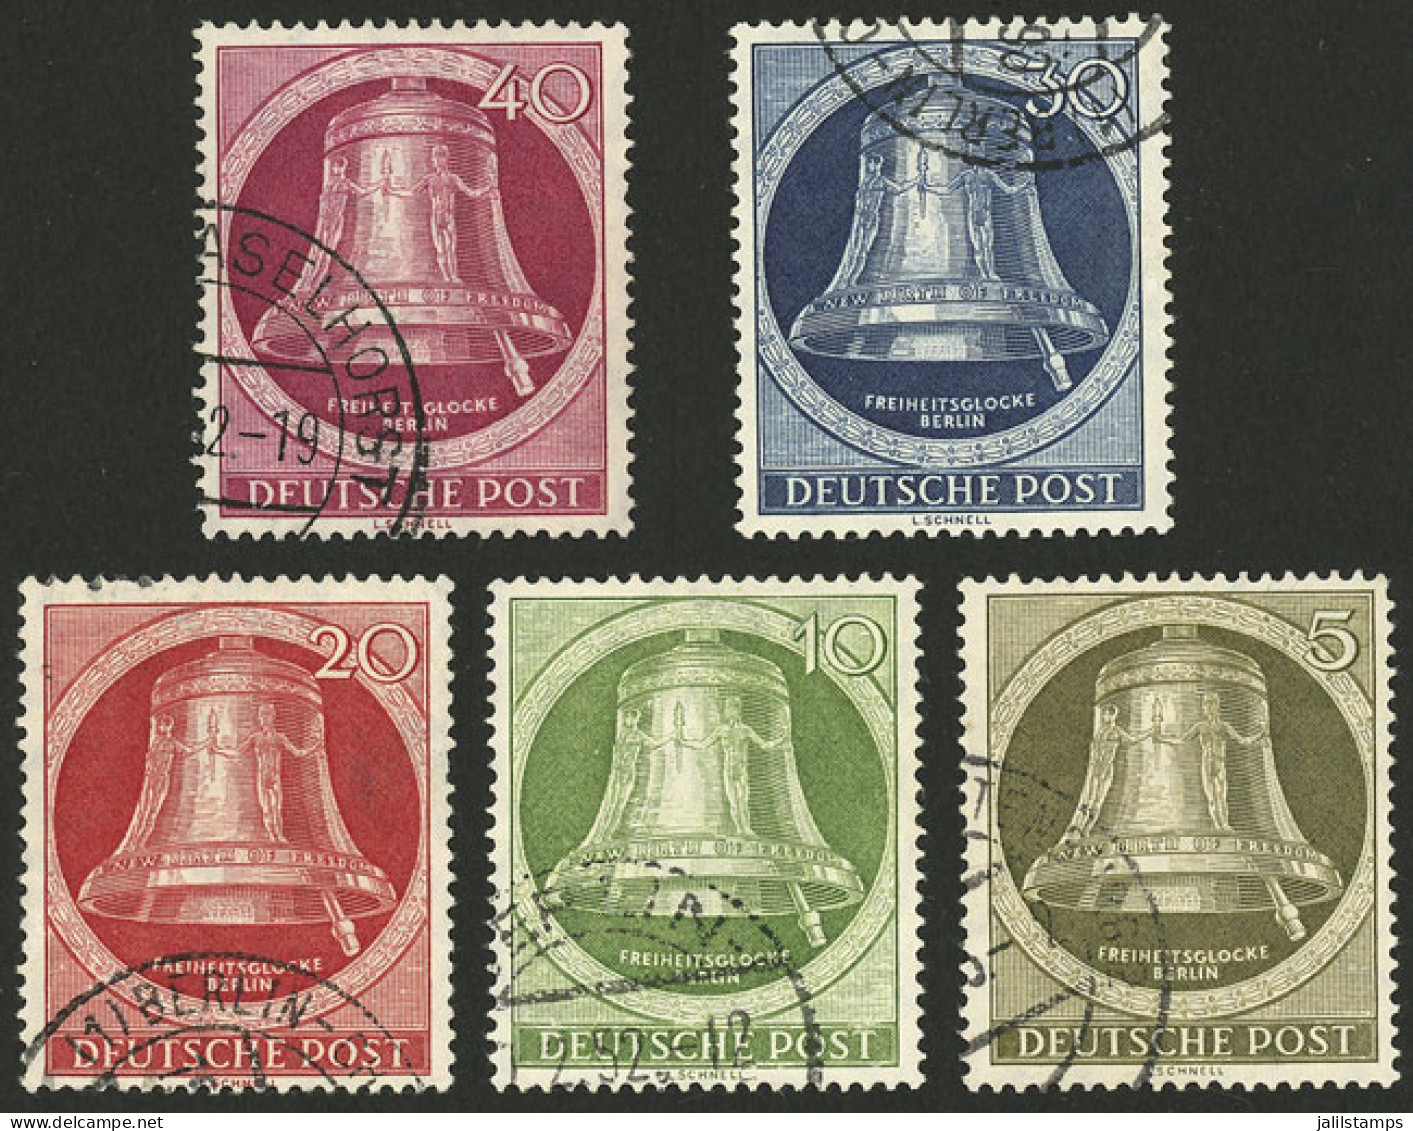 WEST GERMANY - BERLIN: Yvert 68/72, 1952 Bell With Clapper At Right, Set Of 5 Used Values, VF Quality! - Usados